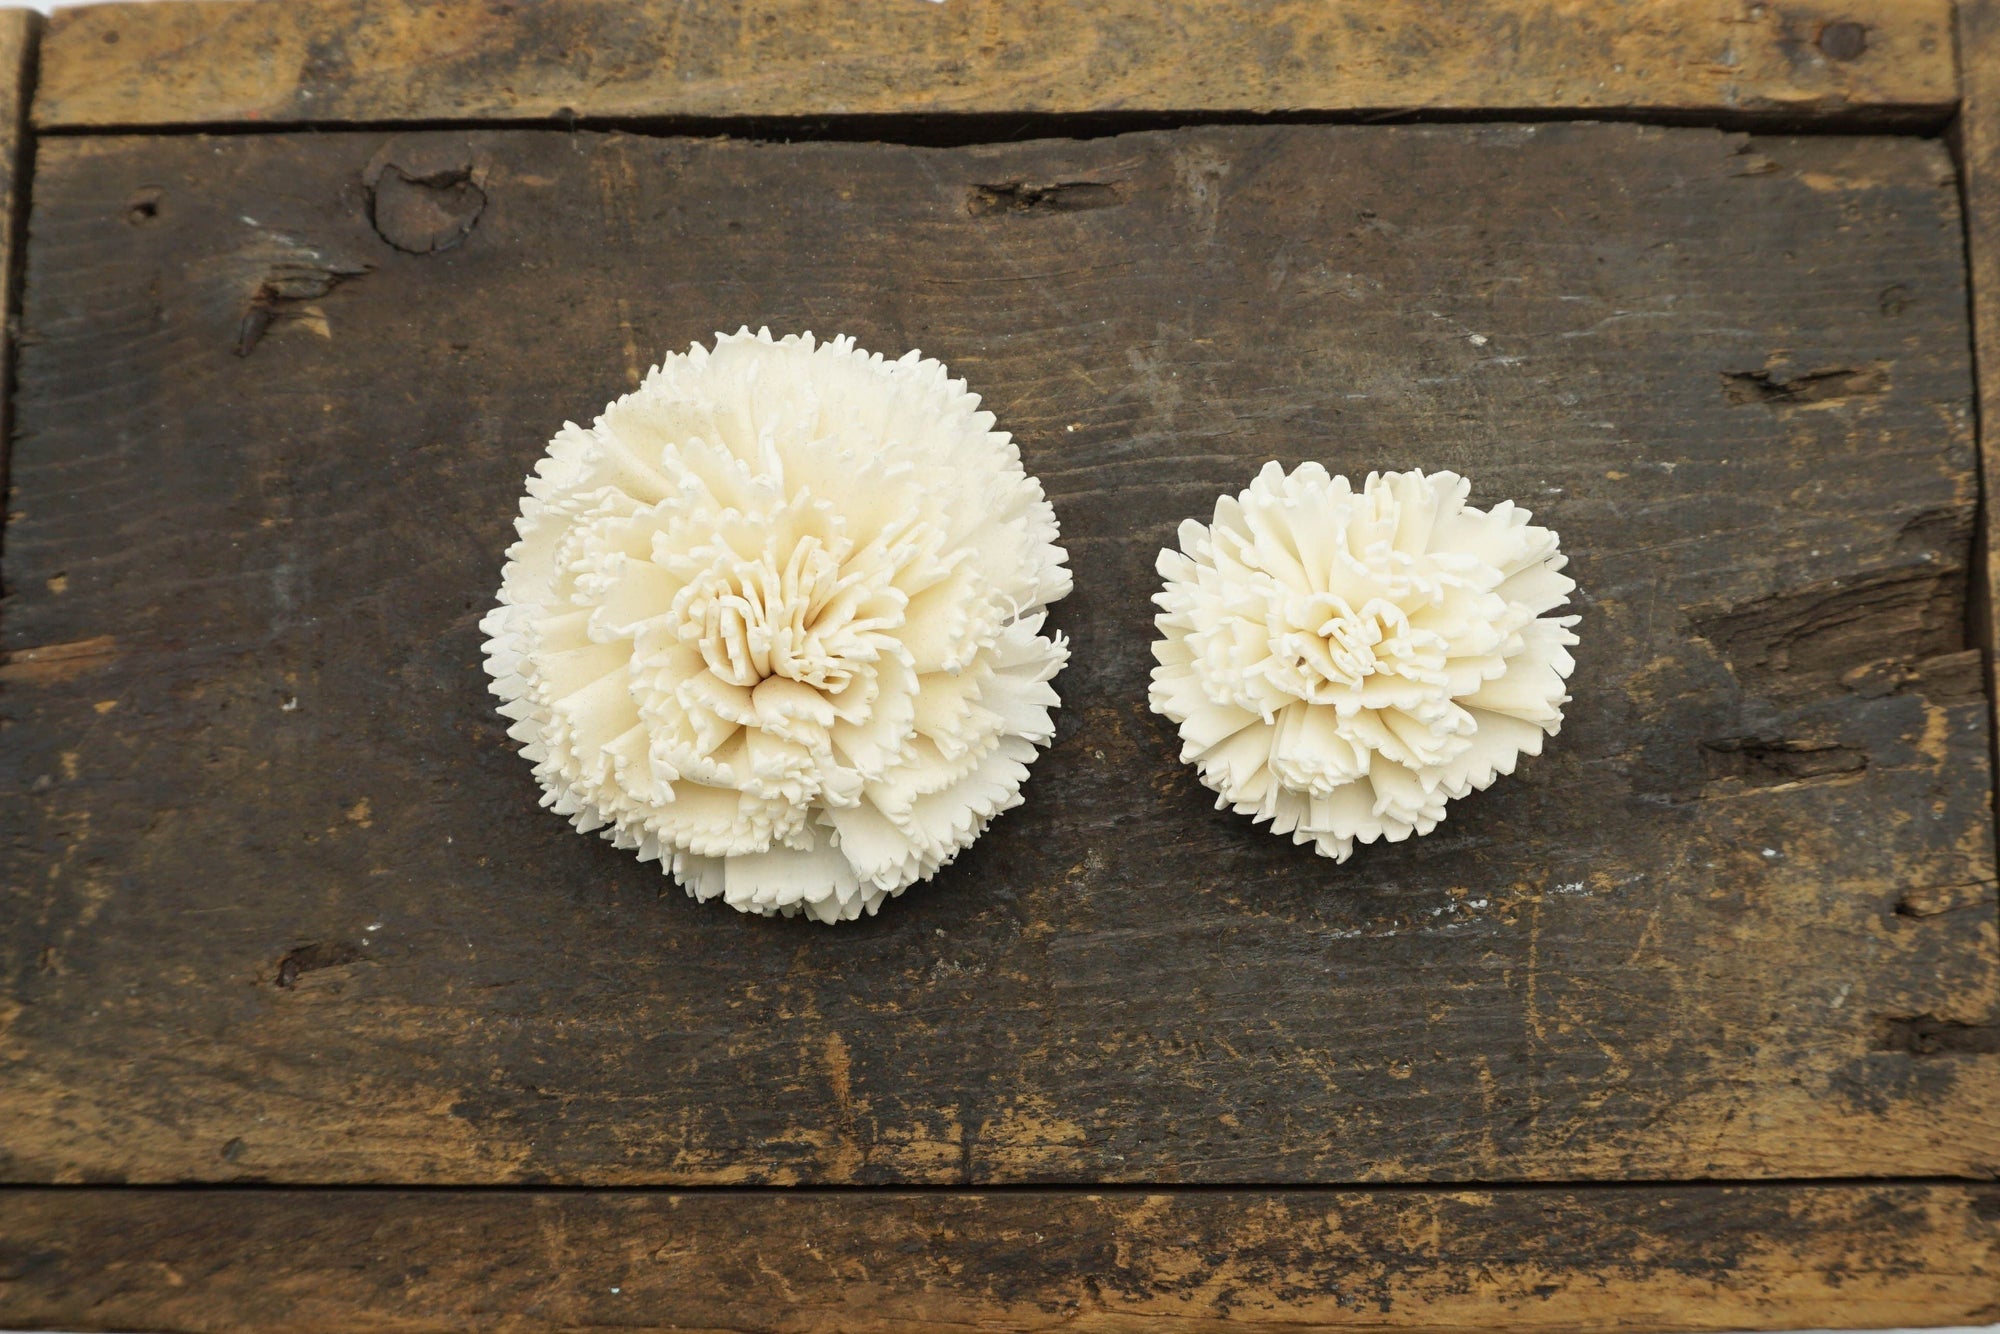 Carnation Flower - set of 12- 3 inches _sola_wood_flowers